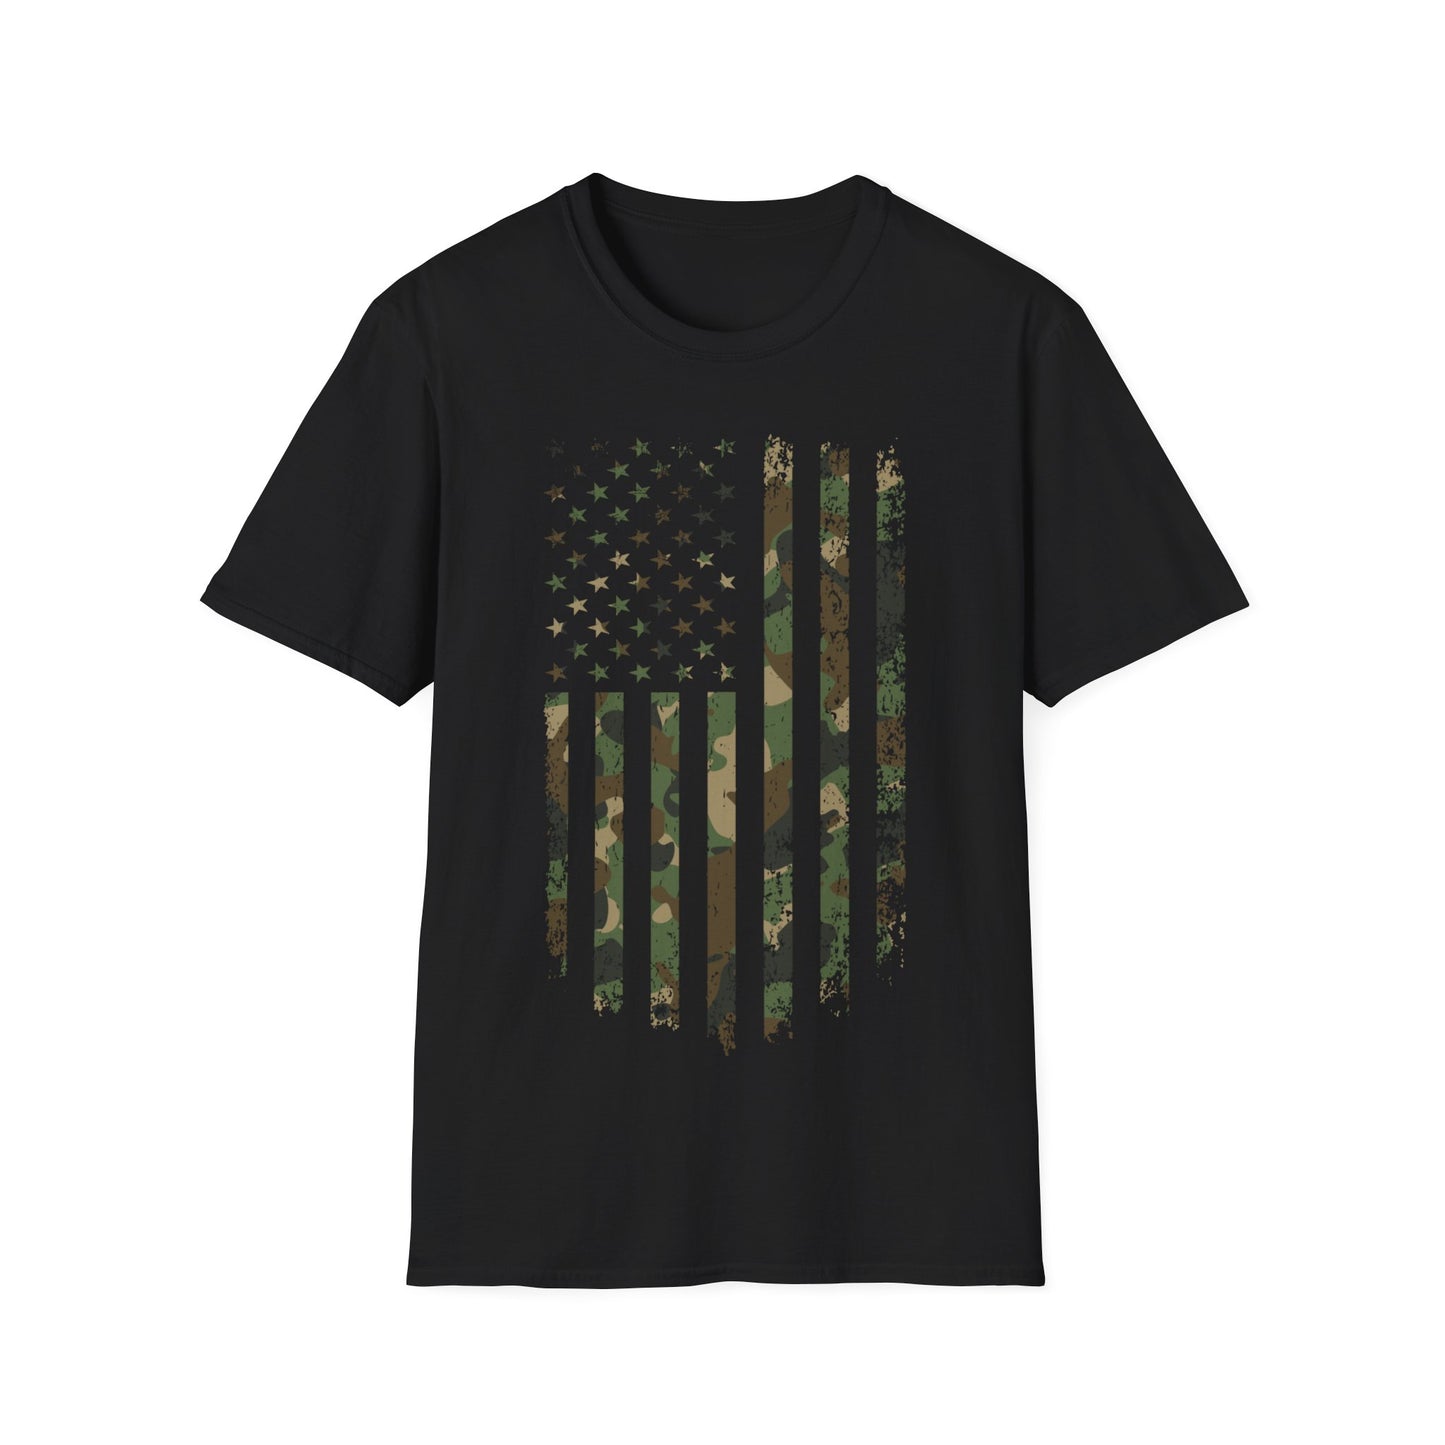 Military American Flag - Unisex - Softstyle T-Shirt